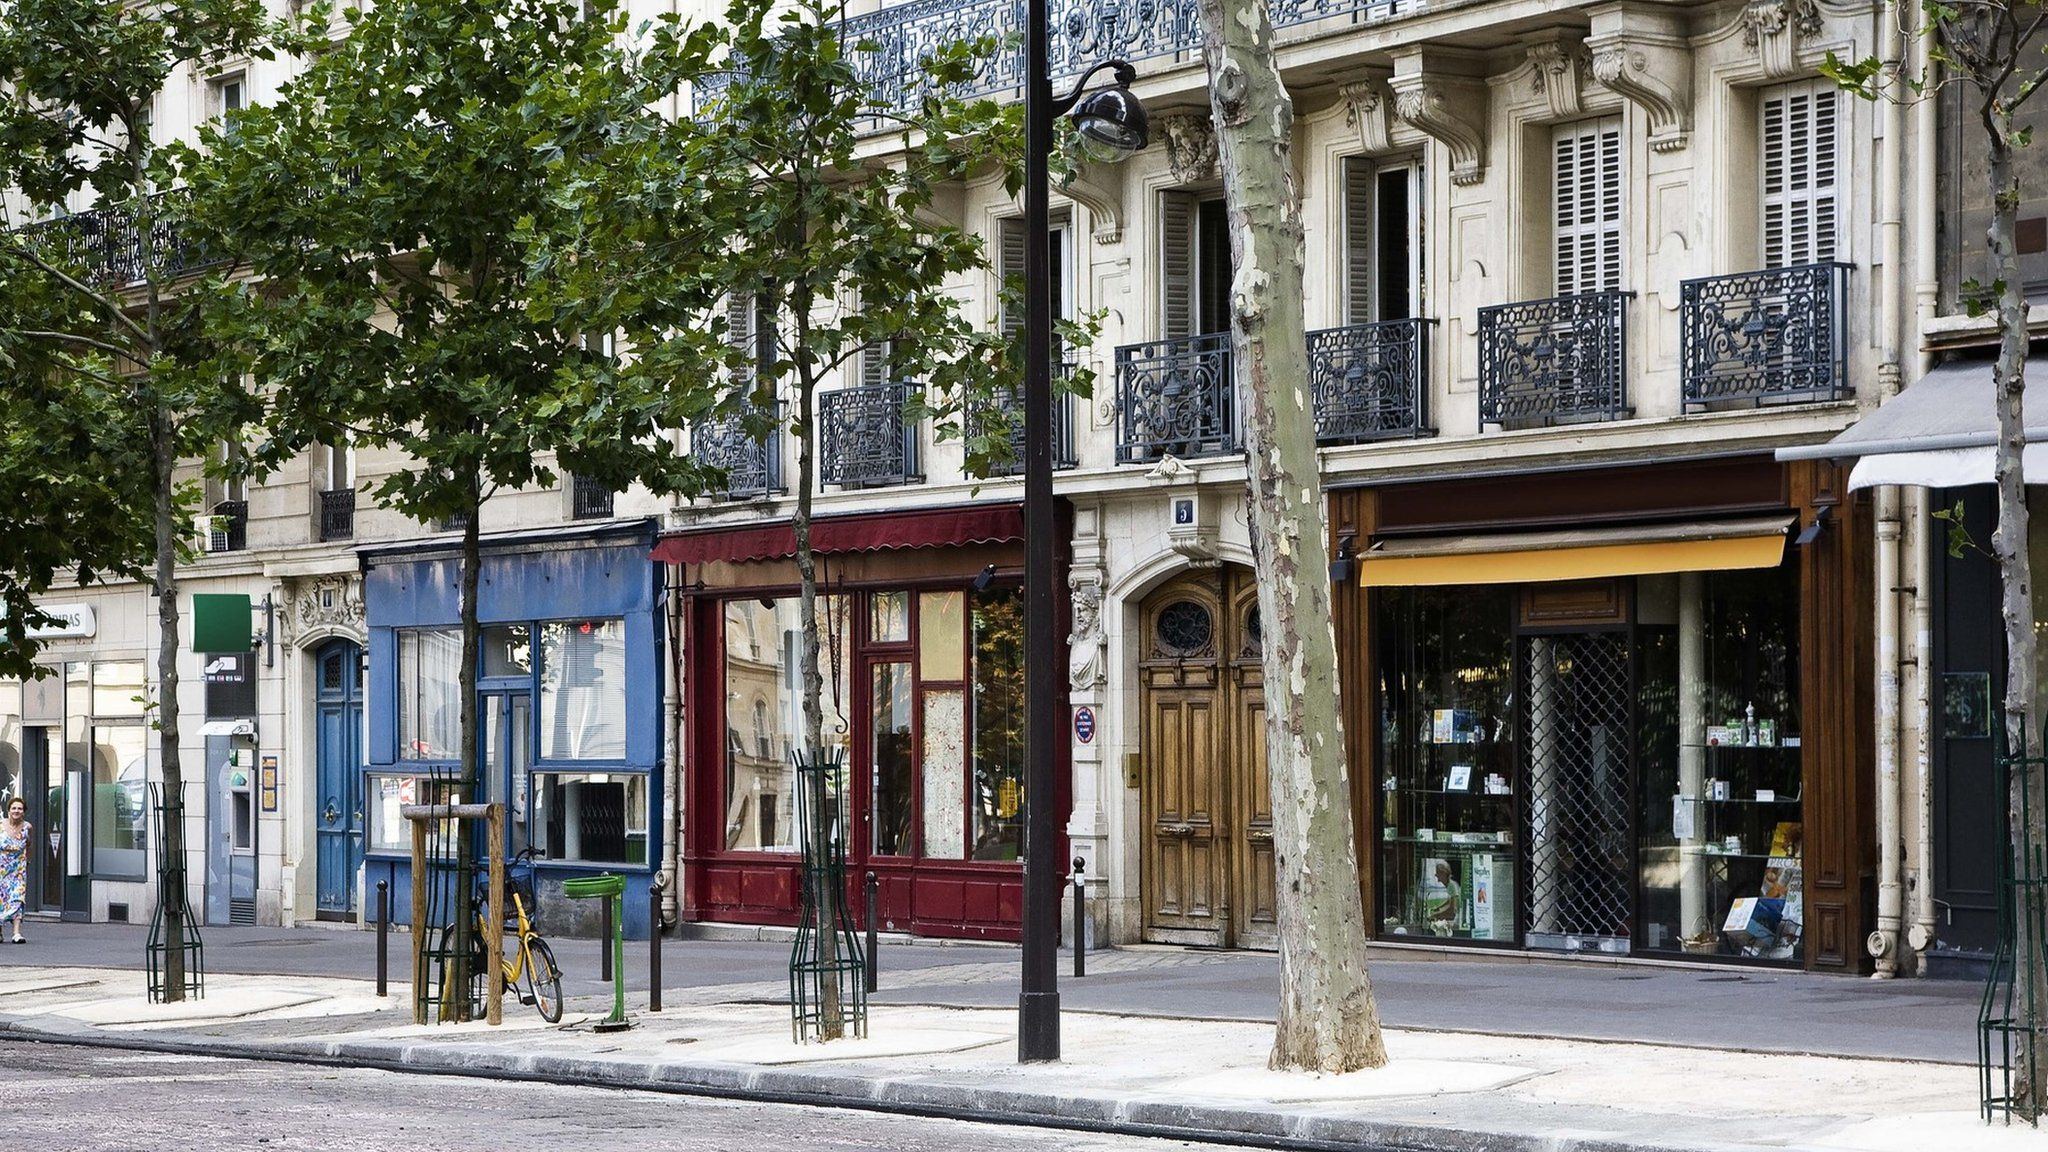 A row of shops in France.